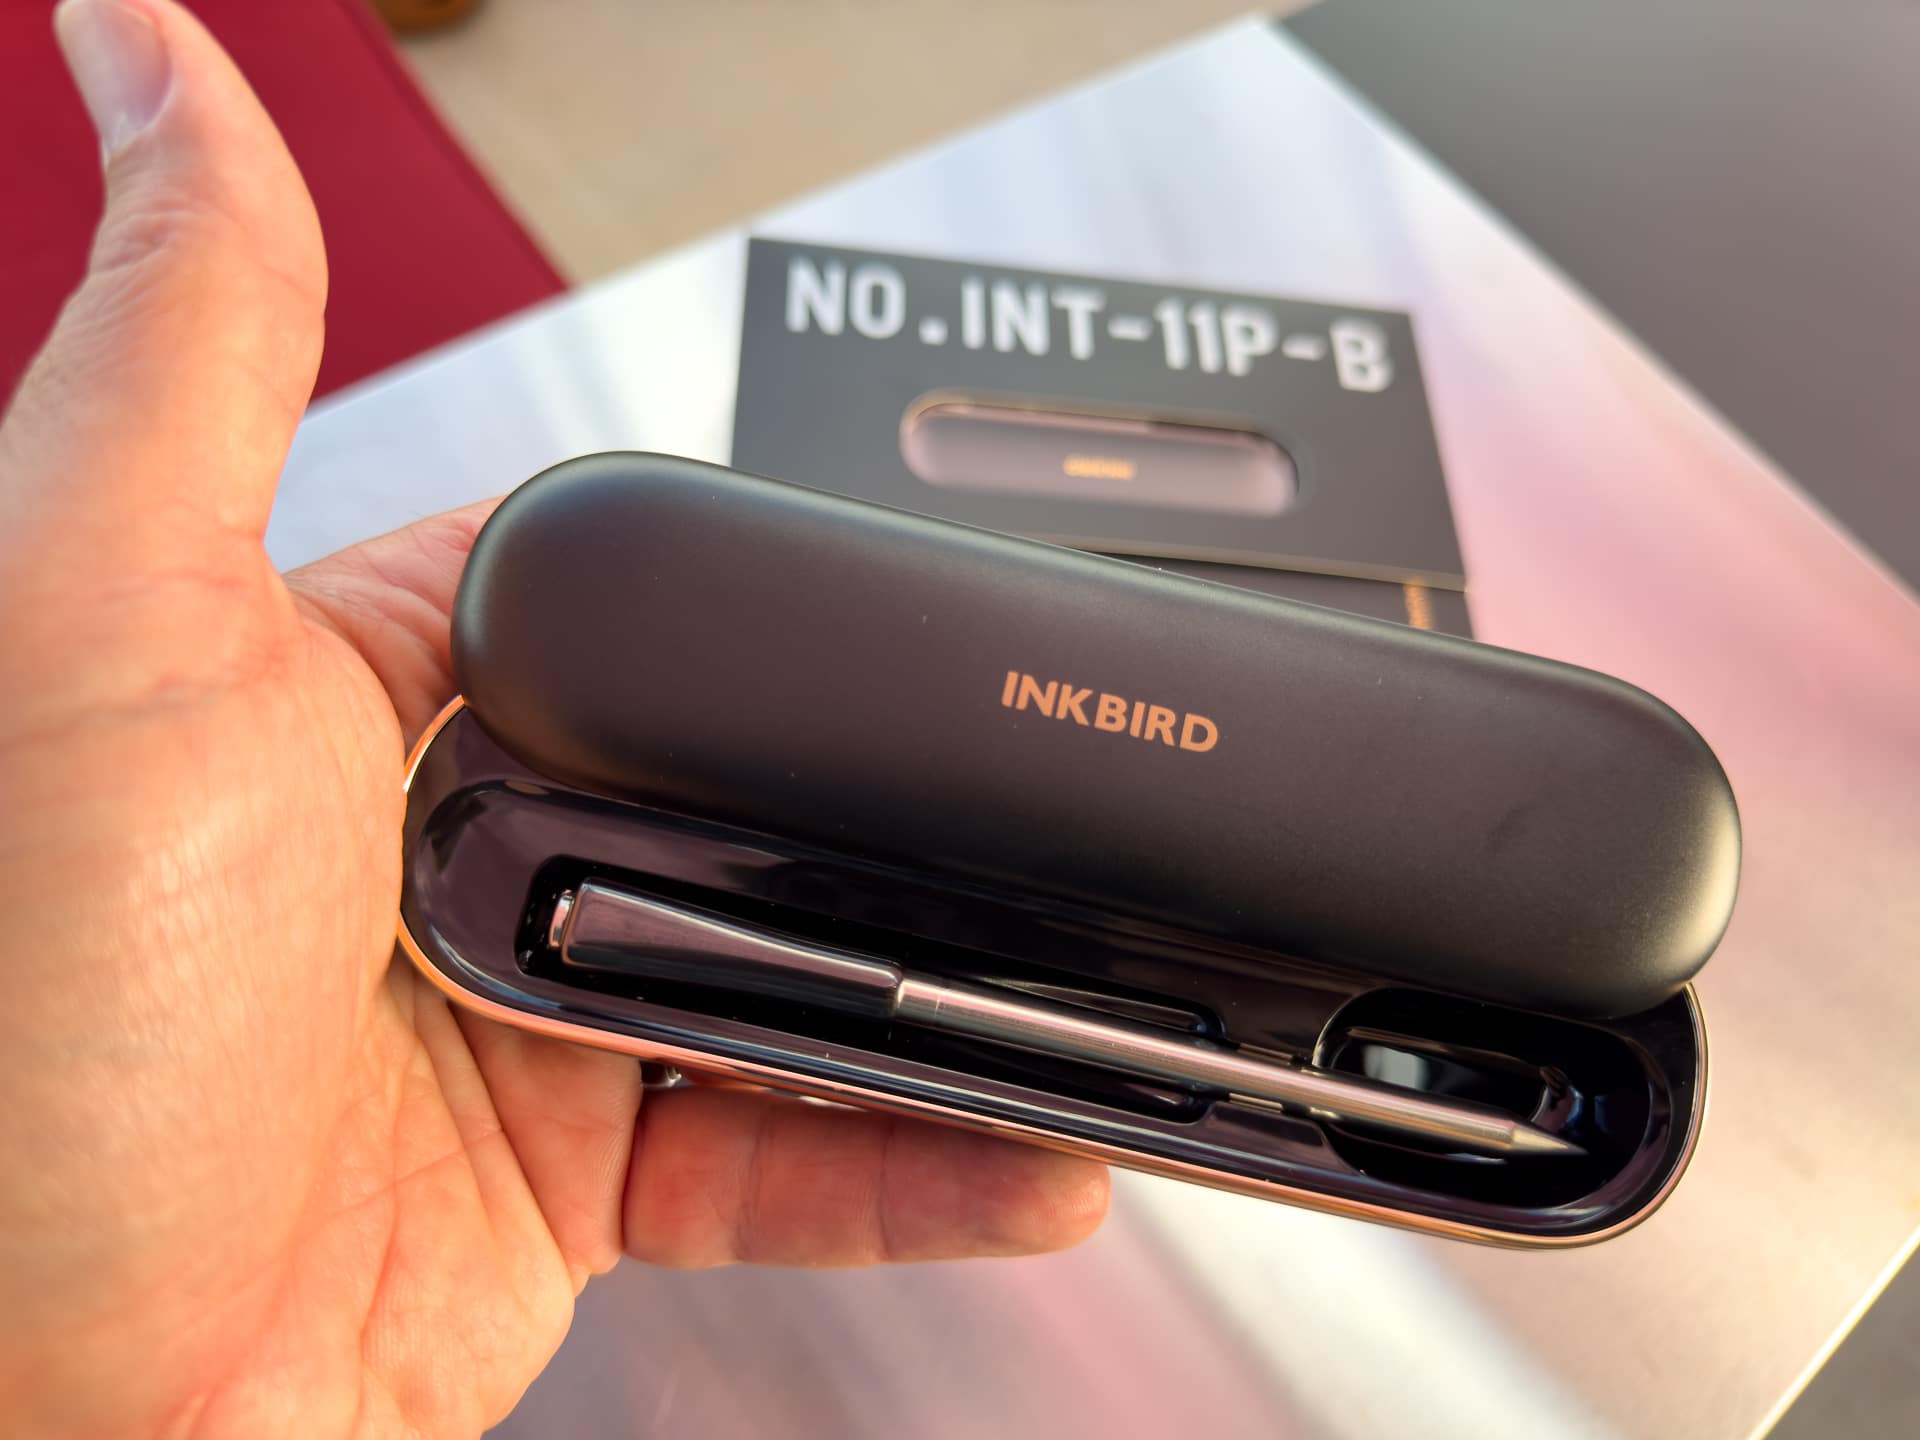 The INKBIRD INT-11P-B Wireless Thermometer probe inside its charging case.